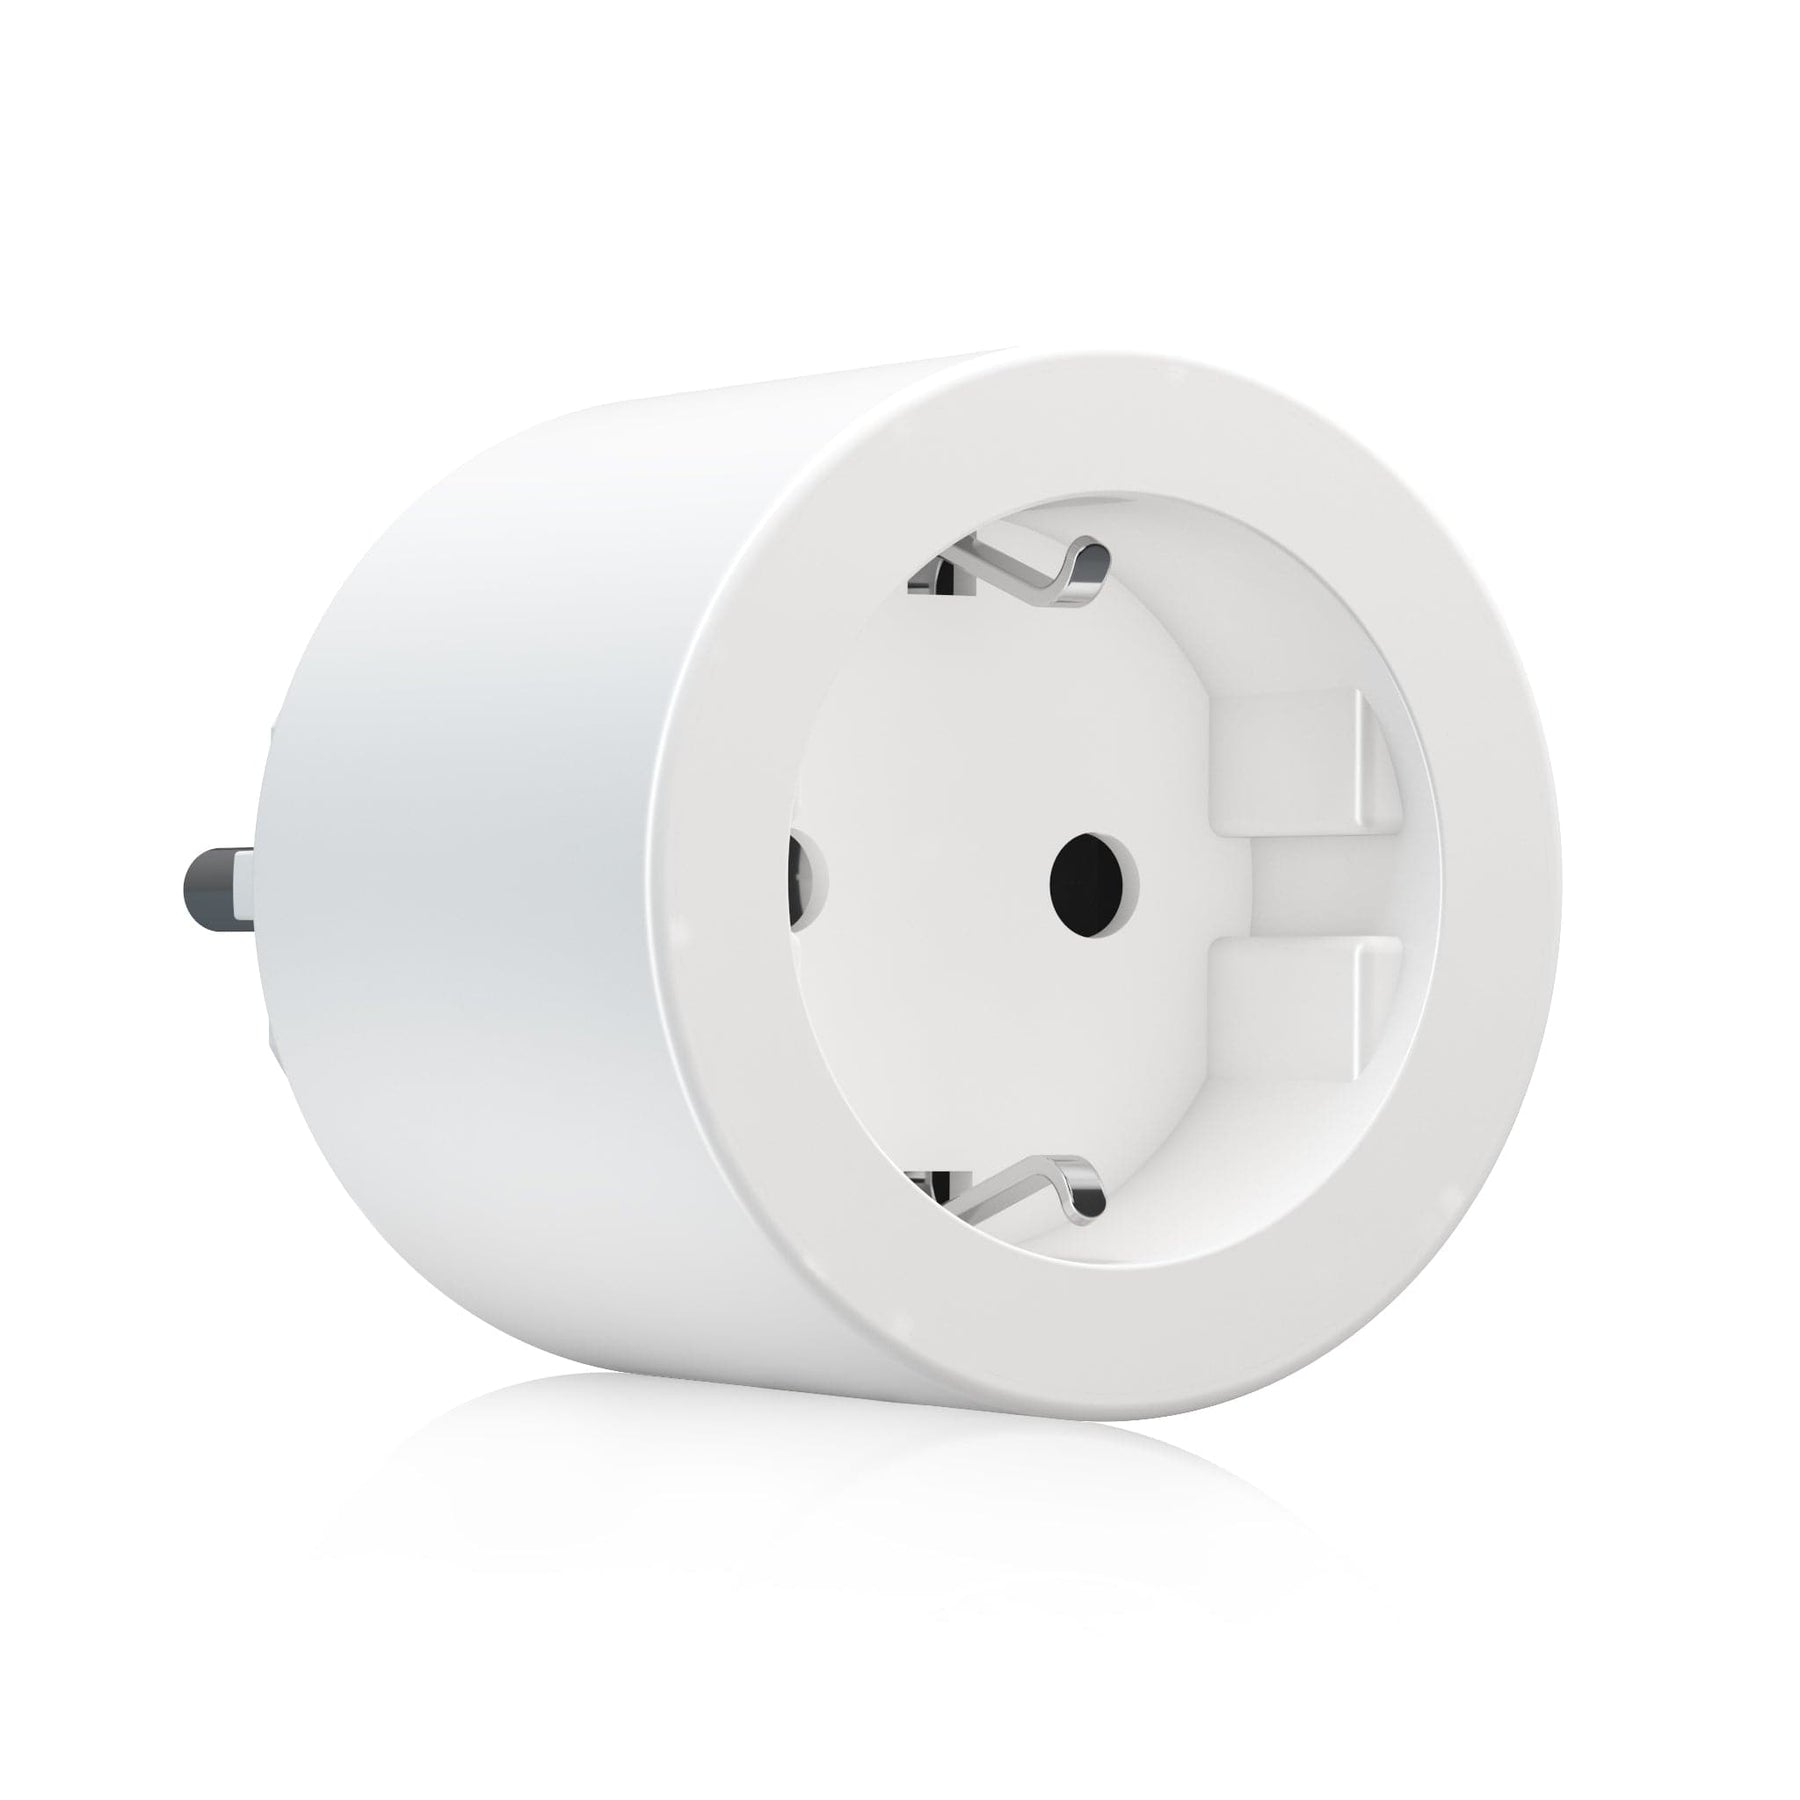 Hihome Smart WiFi Plug Gen2 16A with energy meter